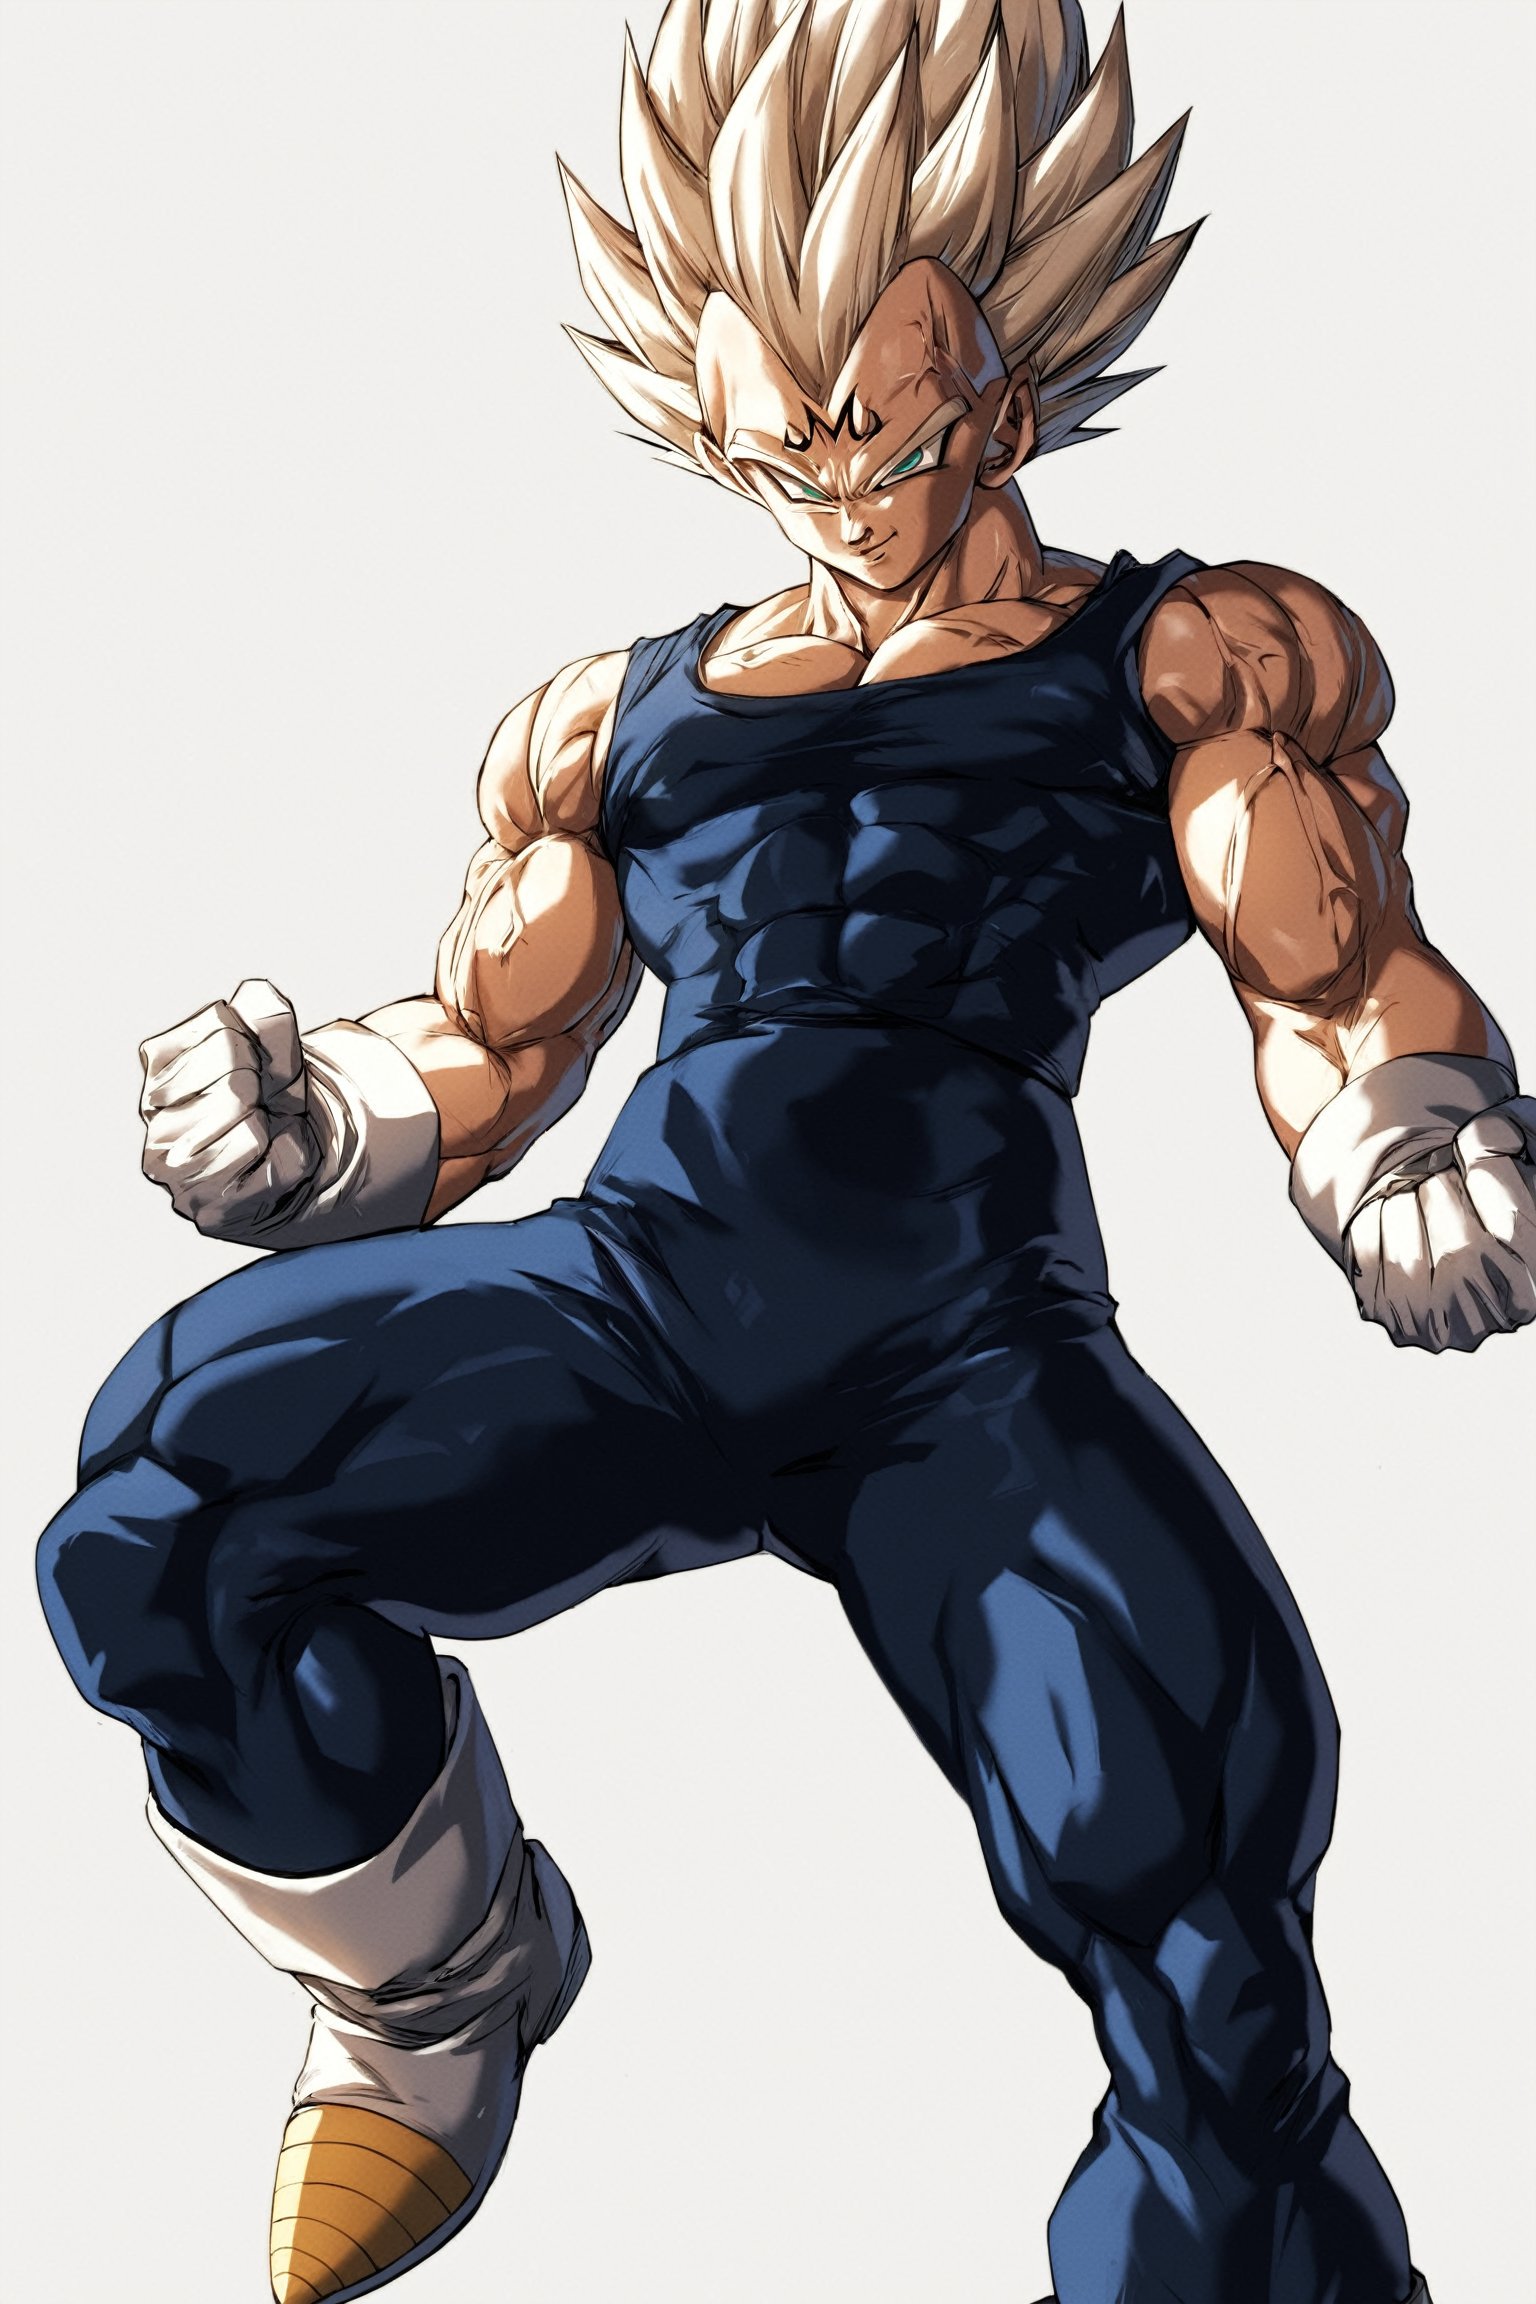 score_9, score_8_up, score_7_up, source_anime, high detail, high quality, perfect face, perfect eyes, well-drawn eyes, Majin, muscle veins, Vegeta wearing a black tank top and large camouflage pants, army boots, flexed, floating in the air, looking down at the viewer, ArtCalmV2